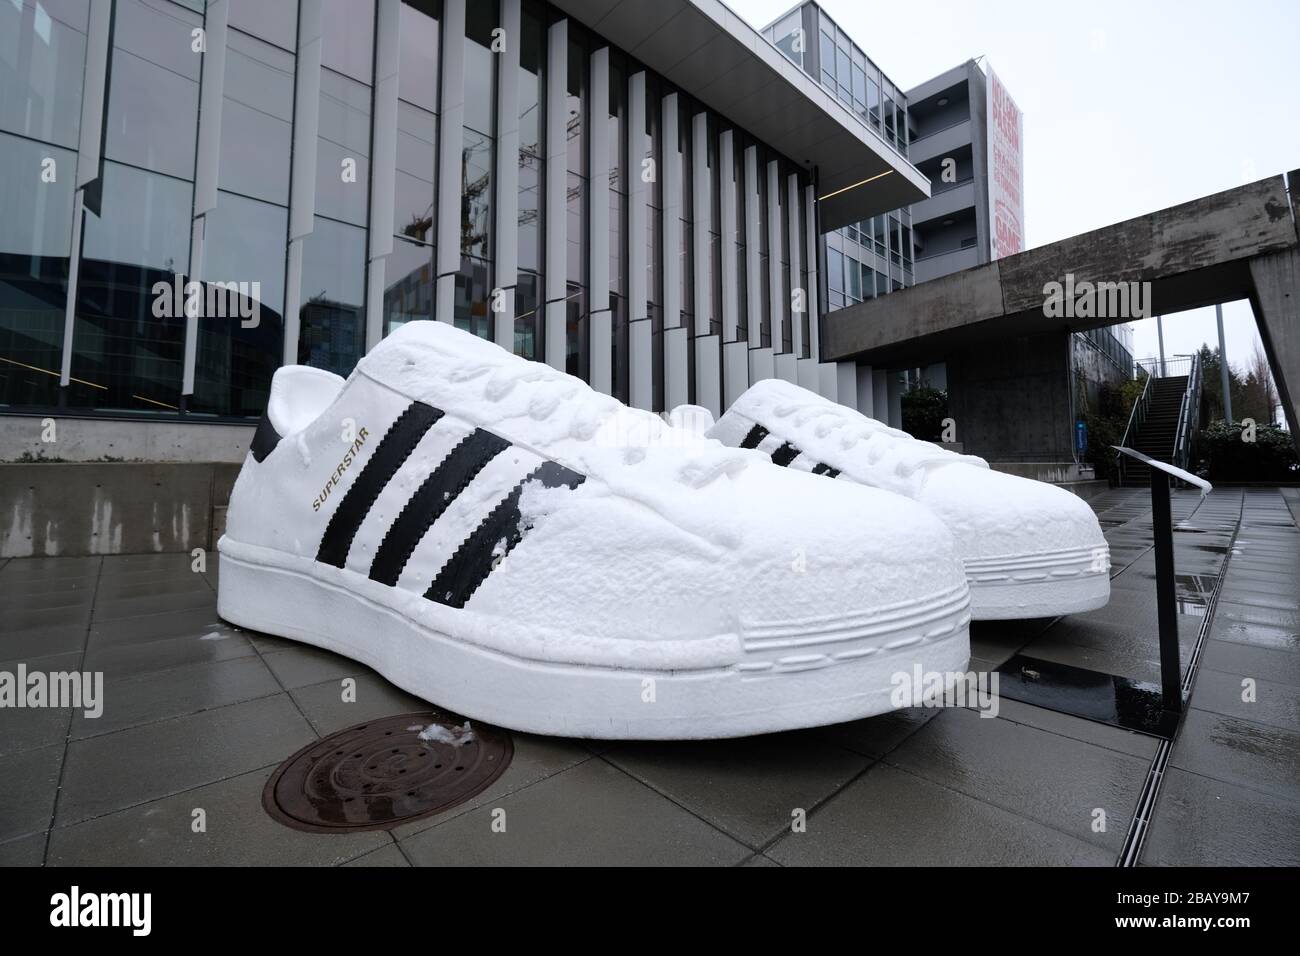 Adidas Superstar Shoes High Resolution Stock Photography and Images - Alamy